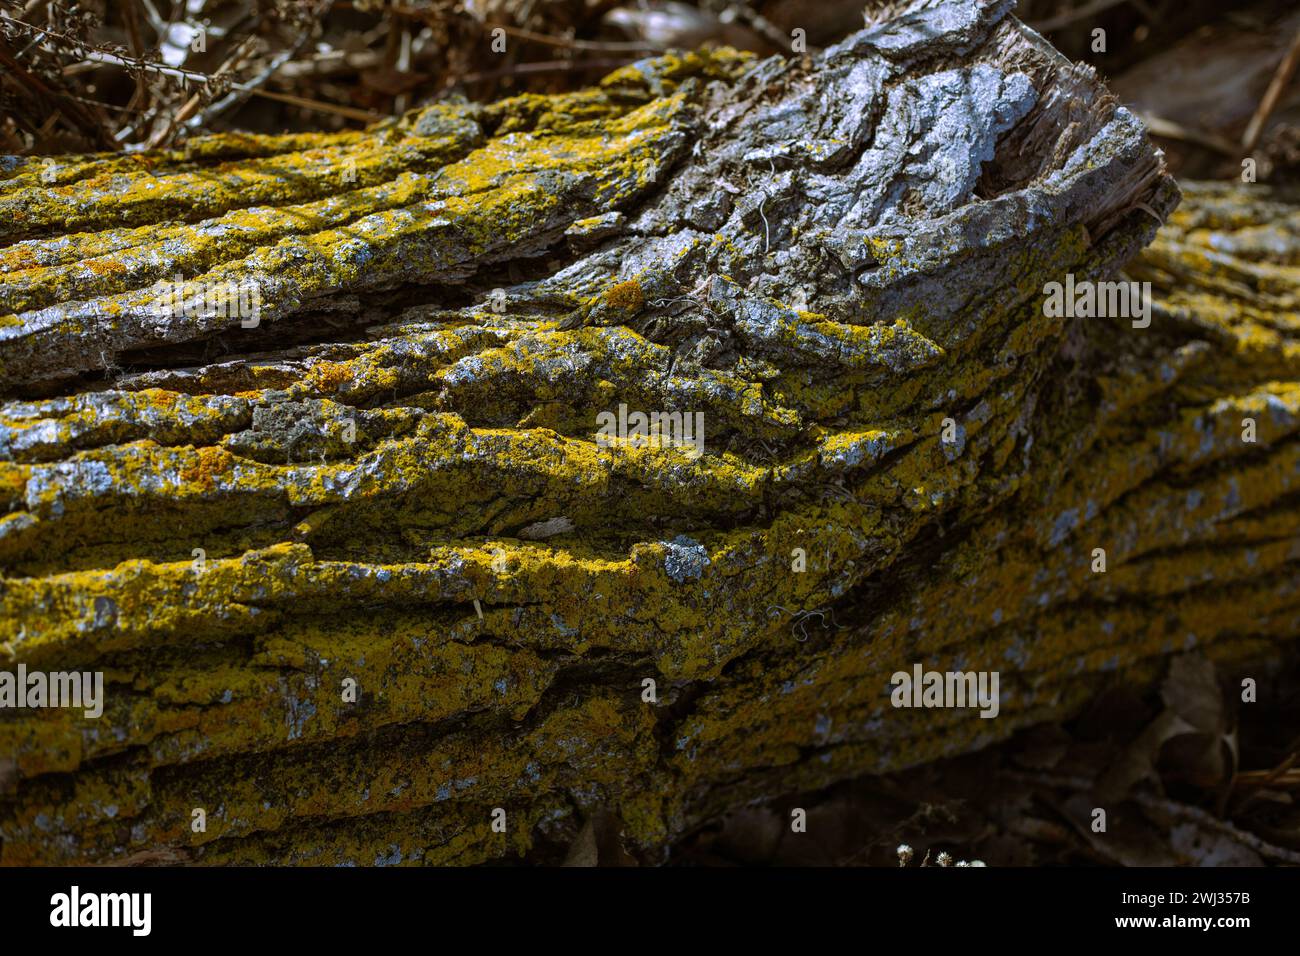 An aged tree trunk adorned with lichen, moss, and fallen foliage Stock Photo